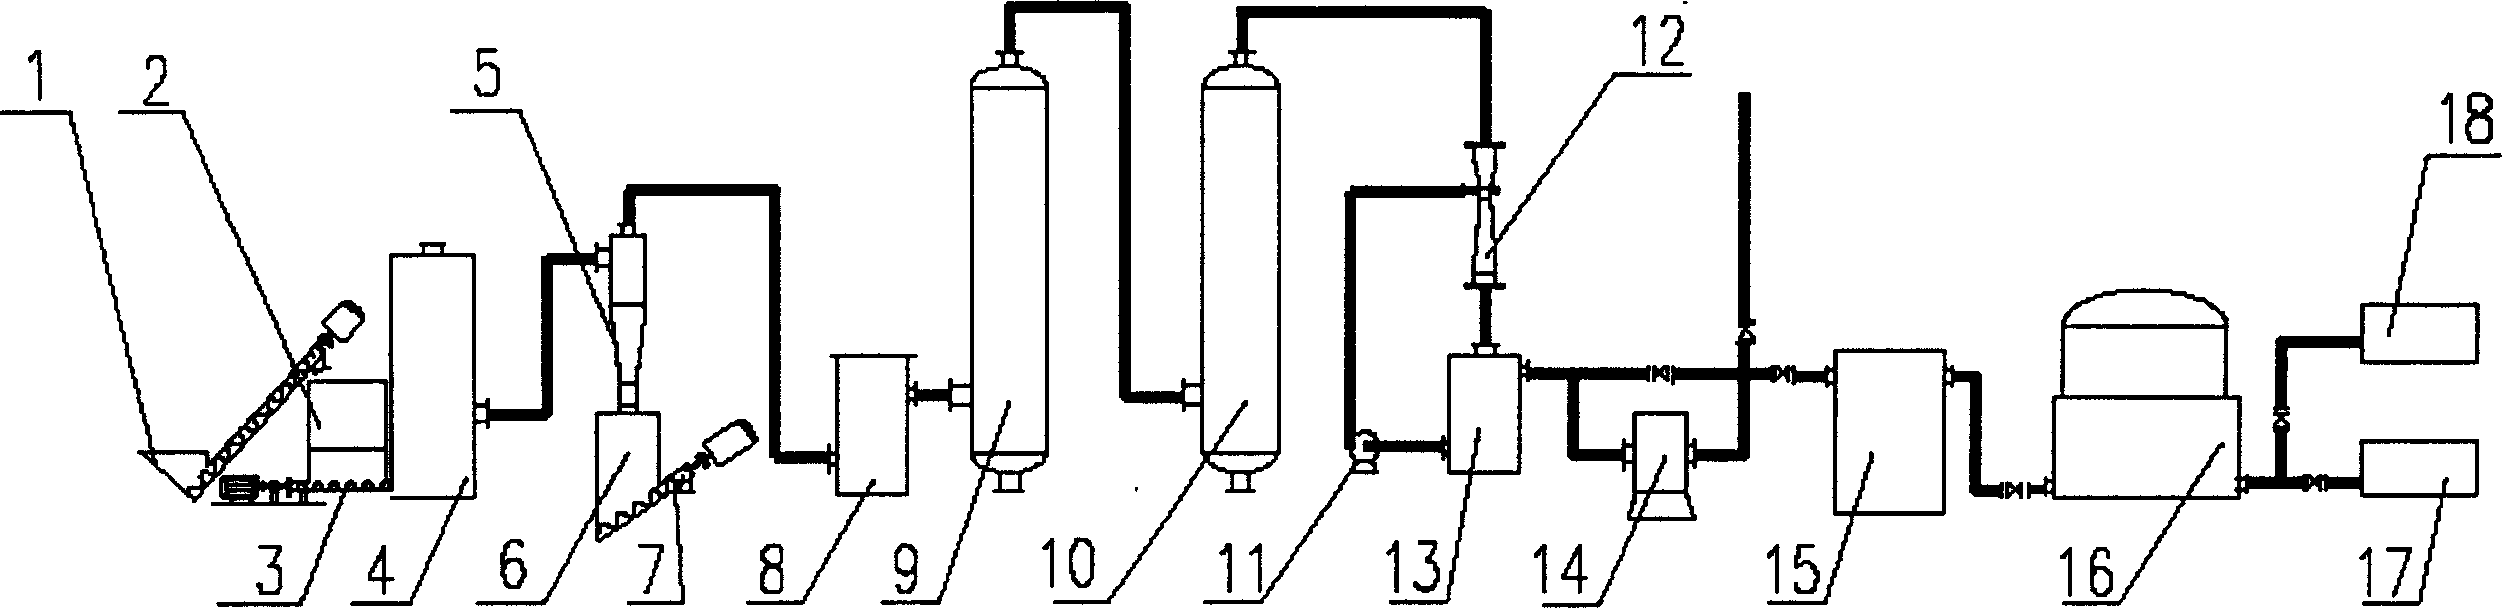 Process and apparatus for preparing coal gas by using bulky biomass materials